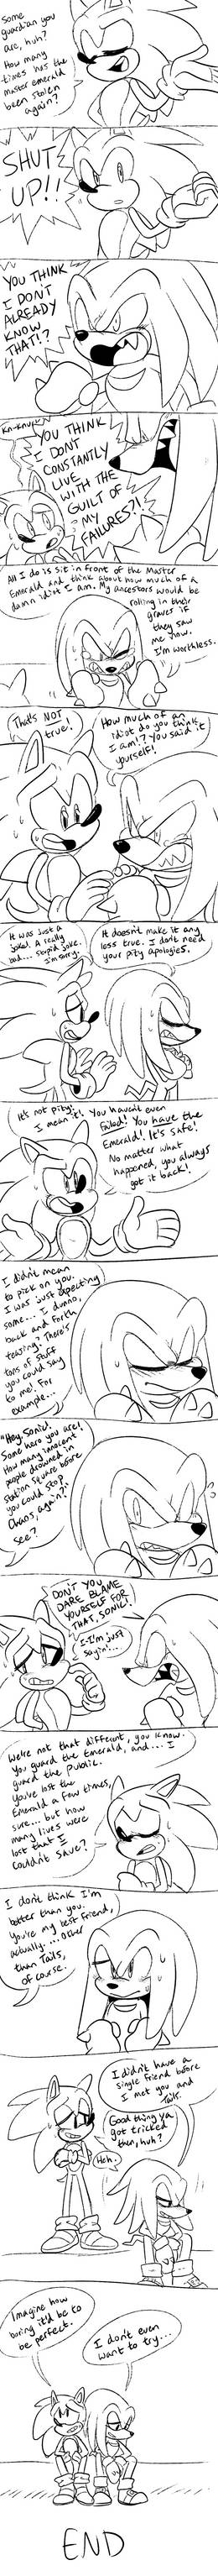 Sonic and Knuckles Comic